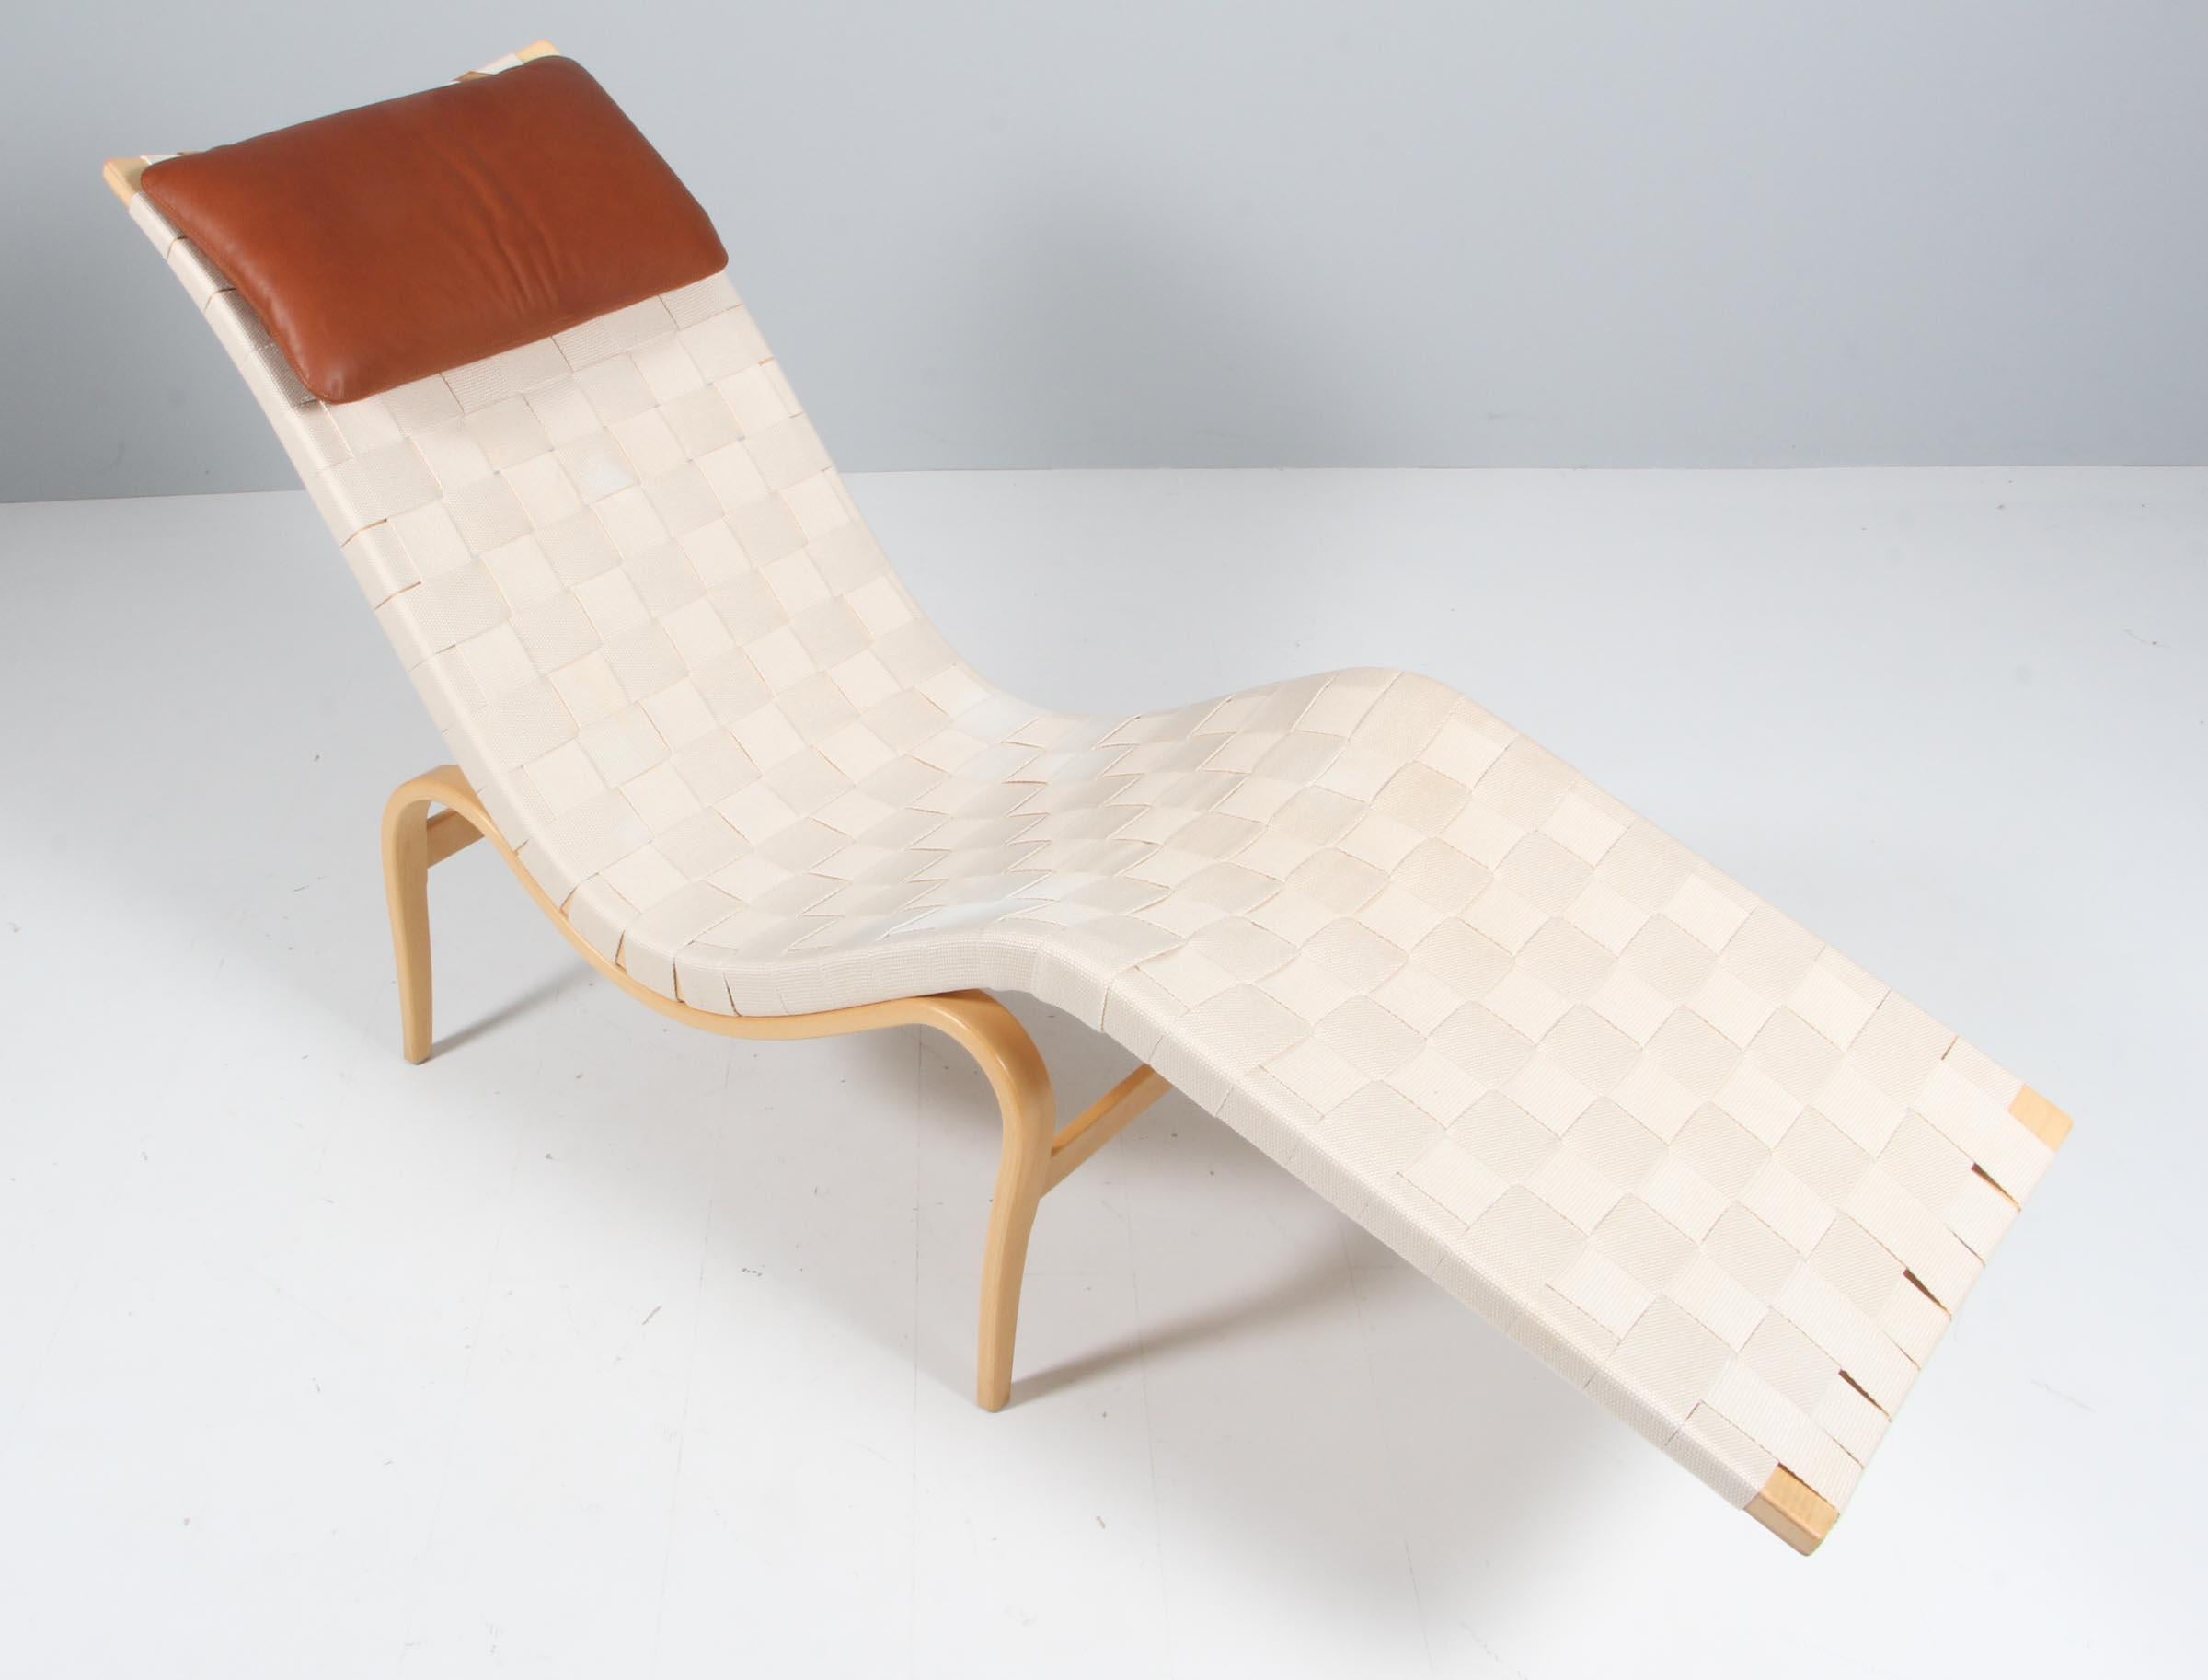 Rare lounge chair model Pernilla / T-108 by Bruno Mathsson produced by Dux. The chair is with webbing and new tan aniline leather pillow.